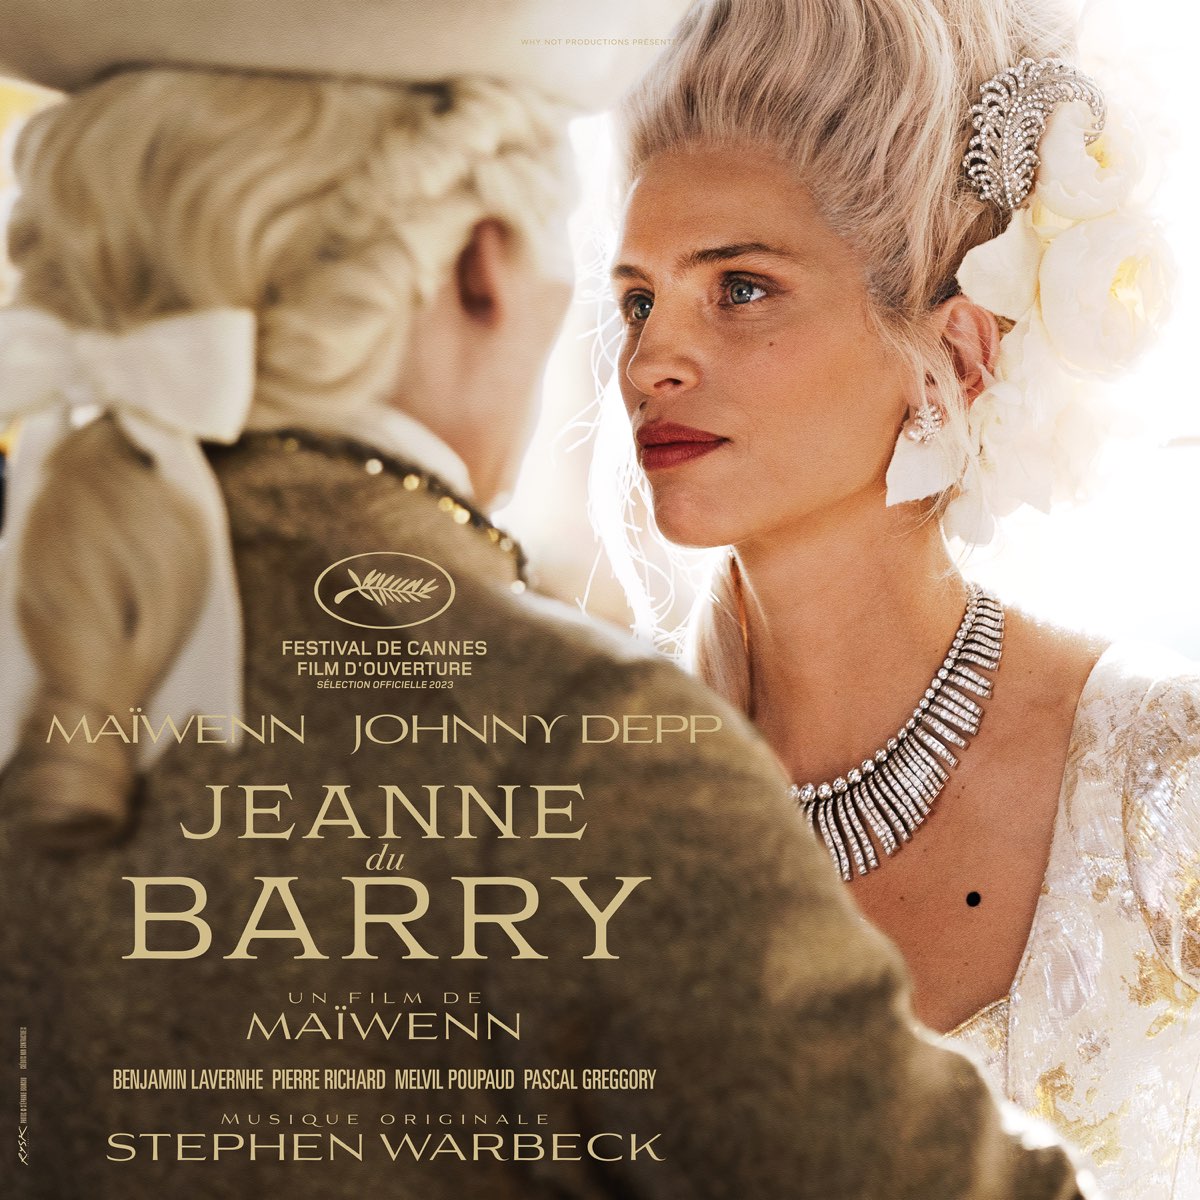 ‎Jeanne du Barry by Stephen Warbeck on Apple Music